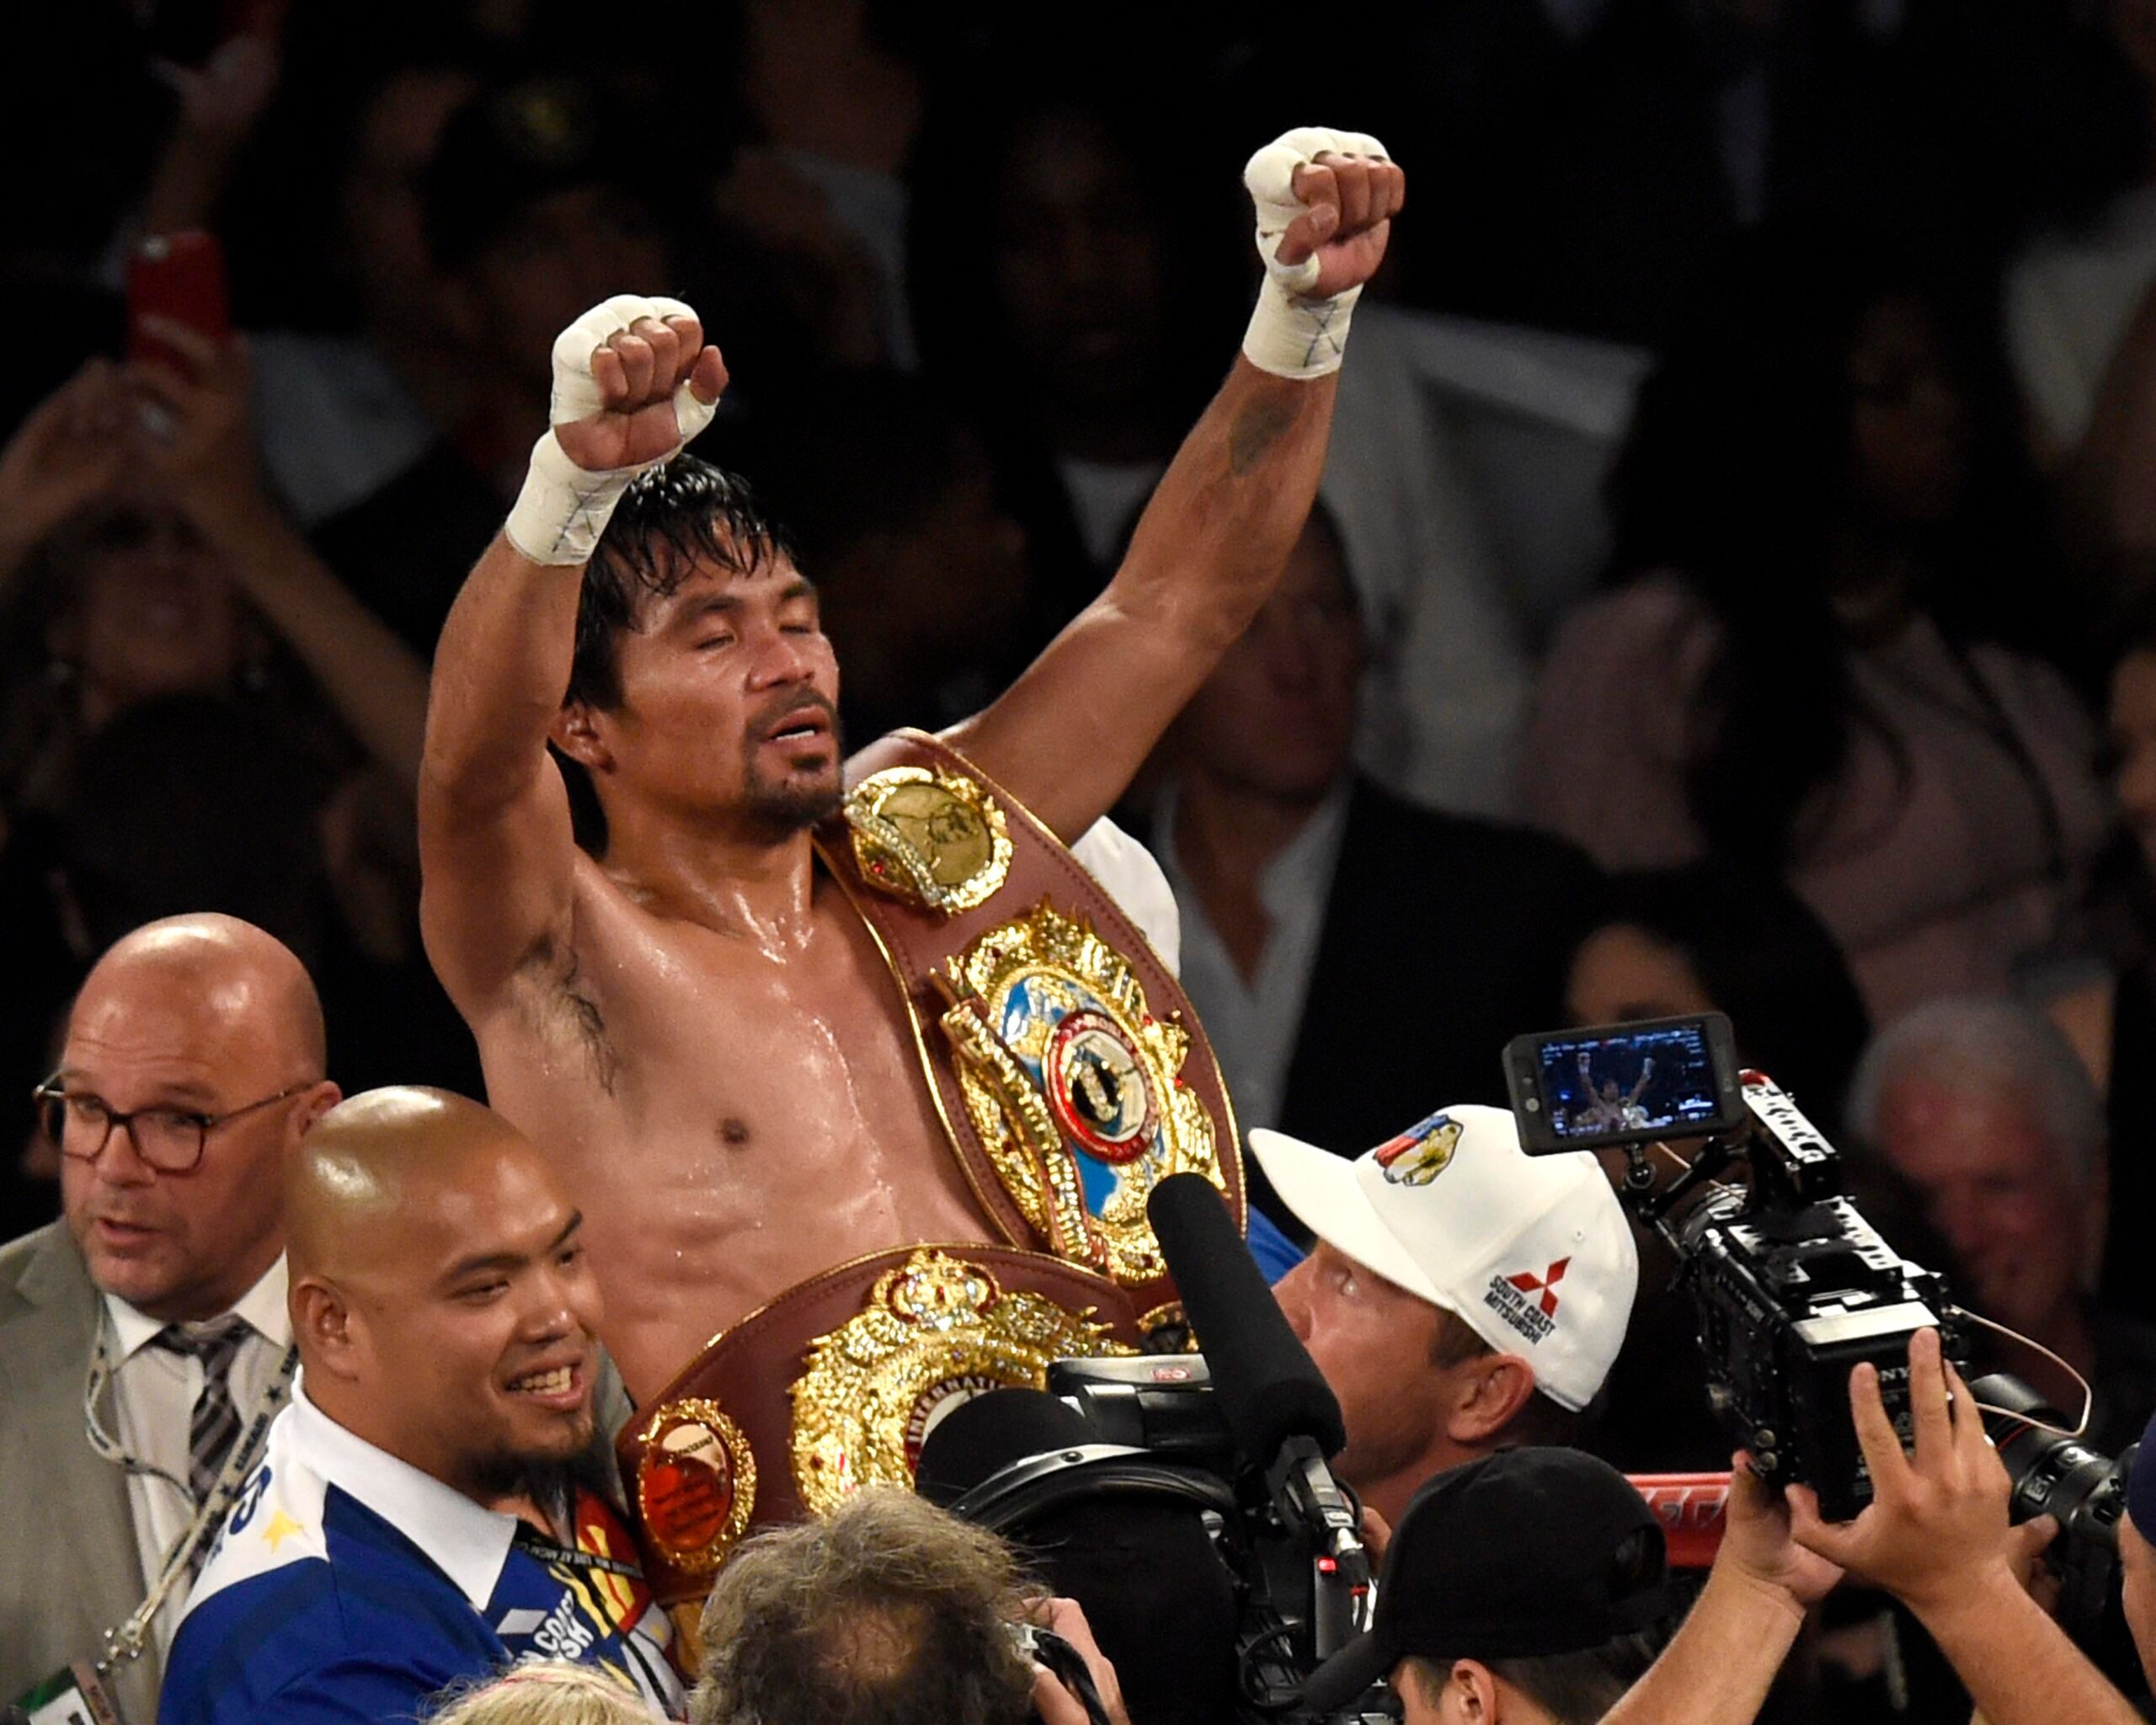 Philippine boxing legend Pacquiao punches way into Senate